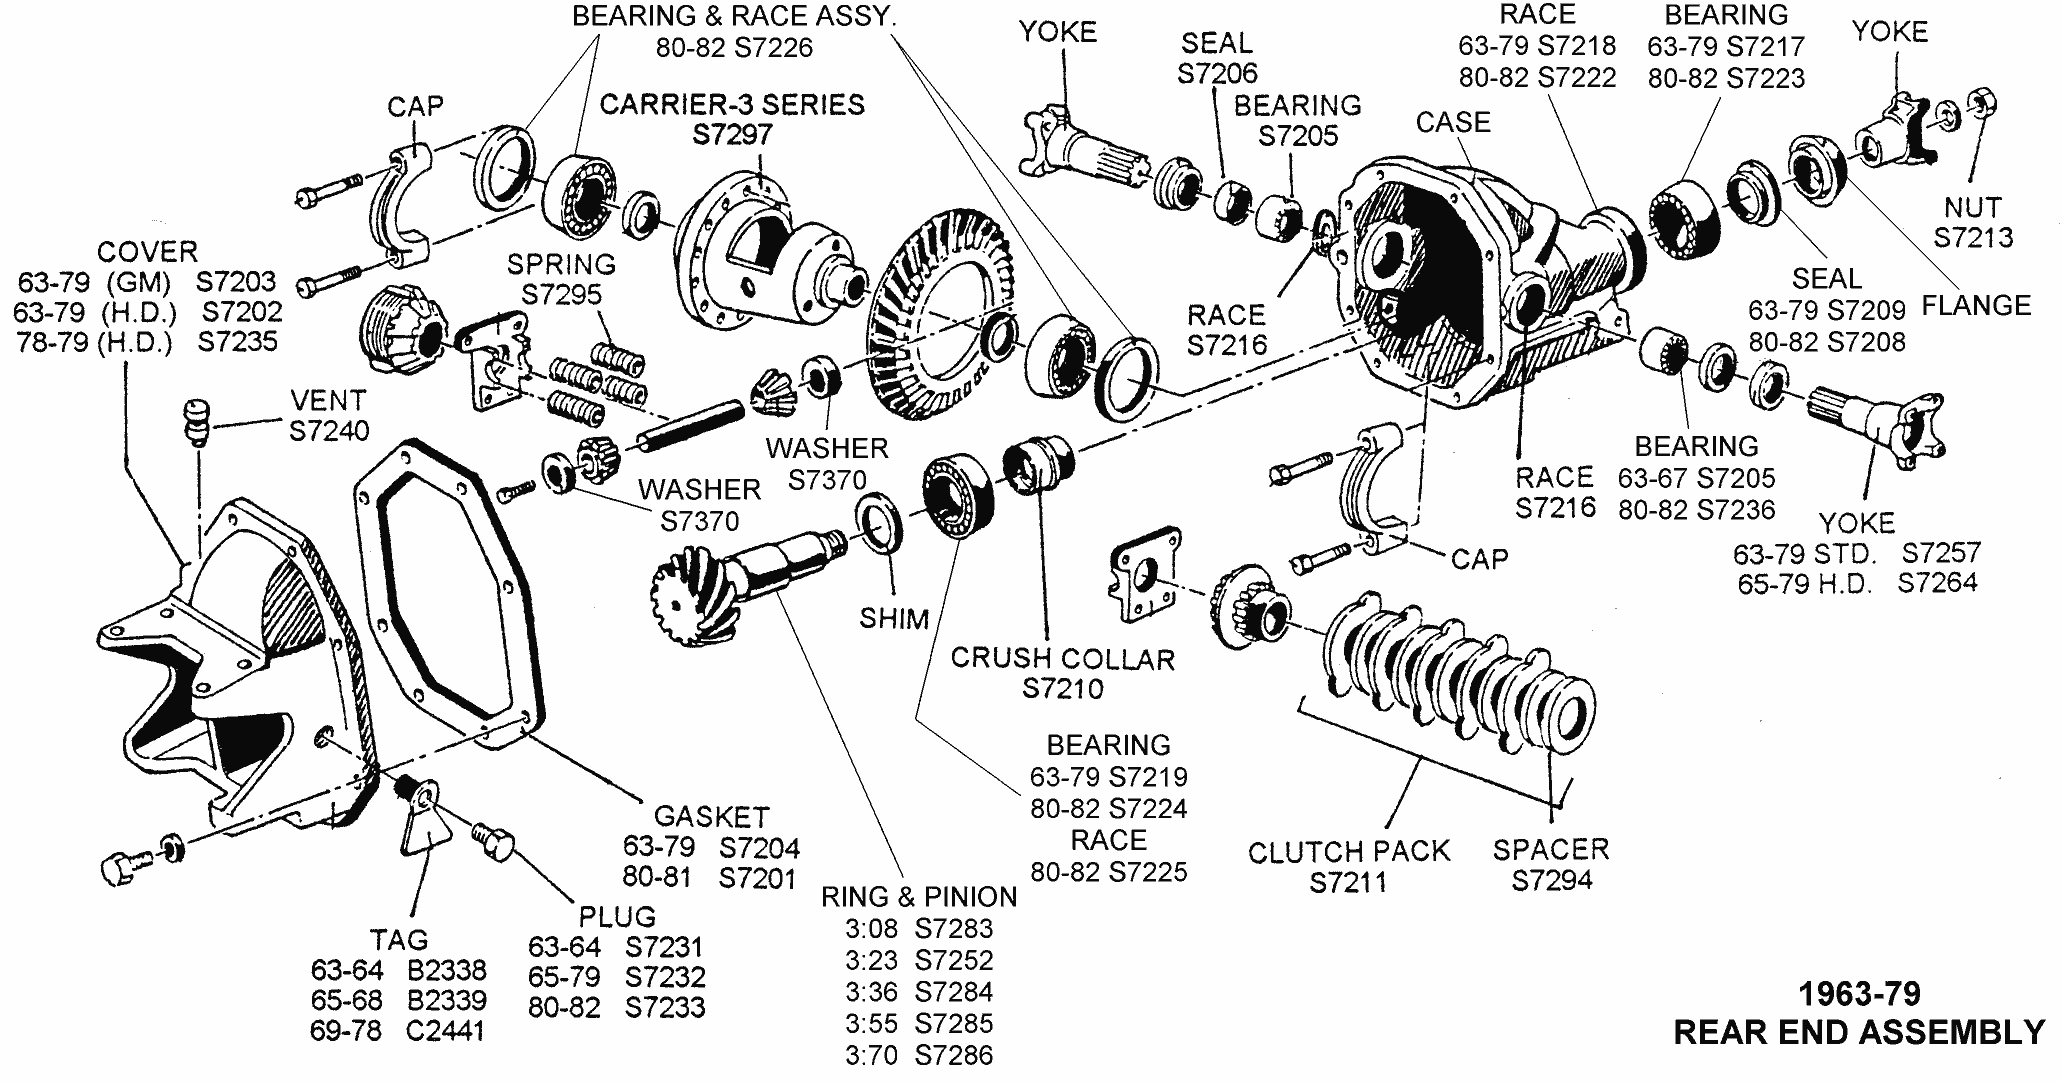 1963-79 Rear End Assembly - Diagram View - Chicago ... 2006 f 650 wiring schematics 